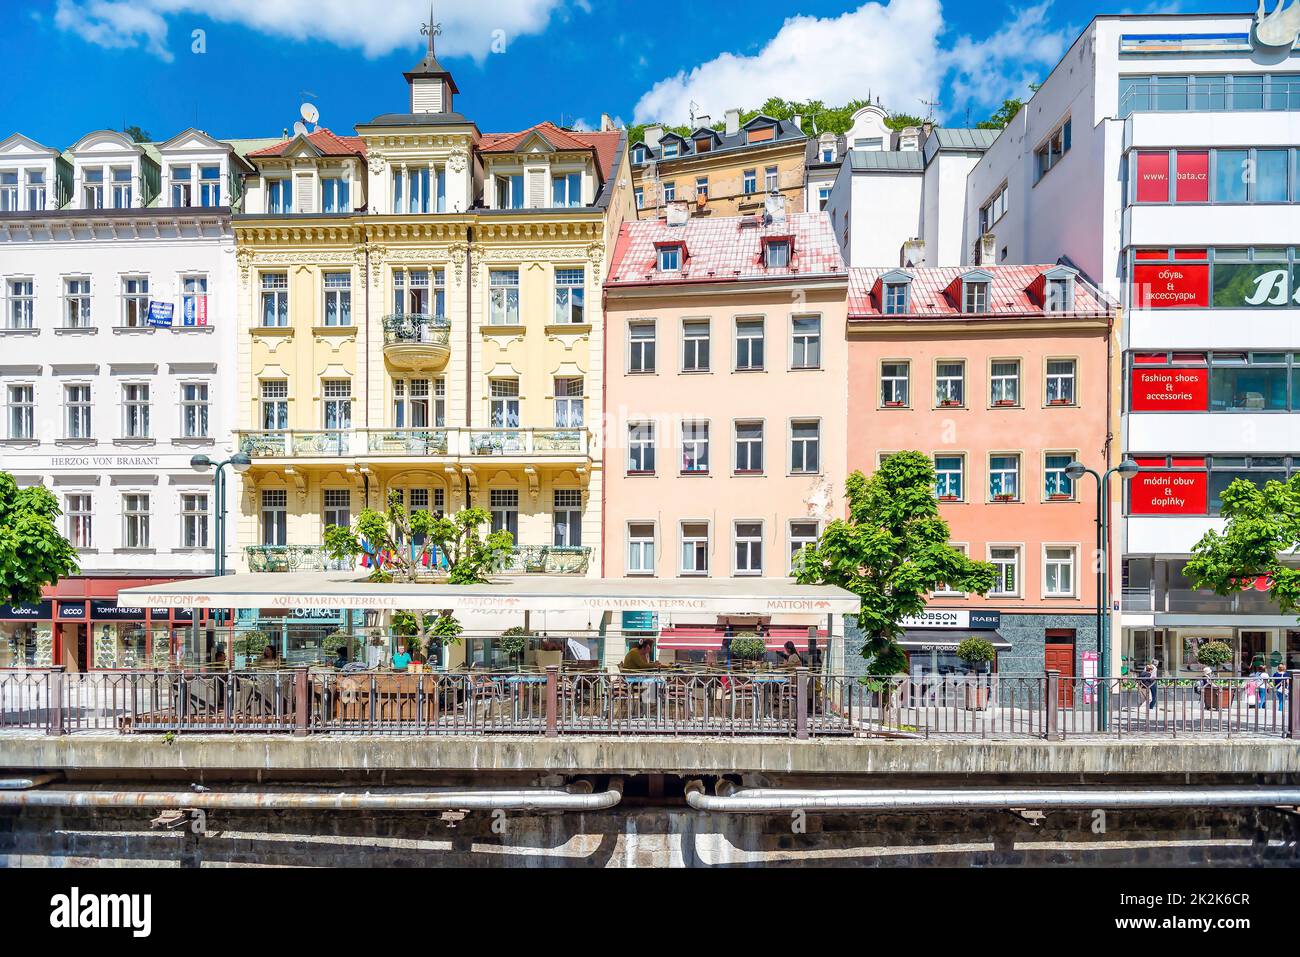 Karlovy Vary, Czech Republic - May 26, 2017: Colorful buildings on the street by Tepla river Stock Photo